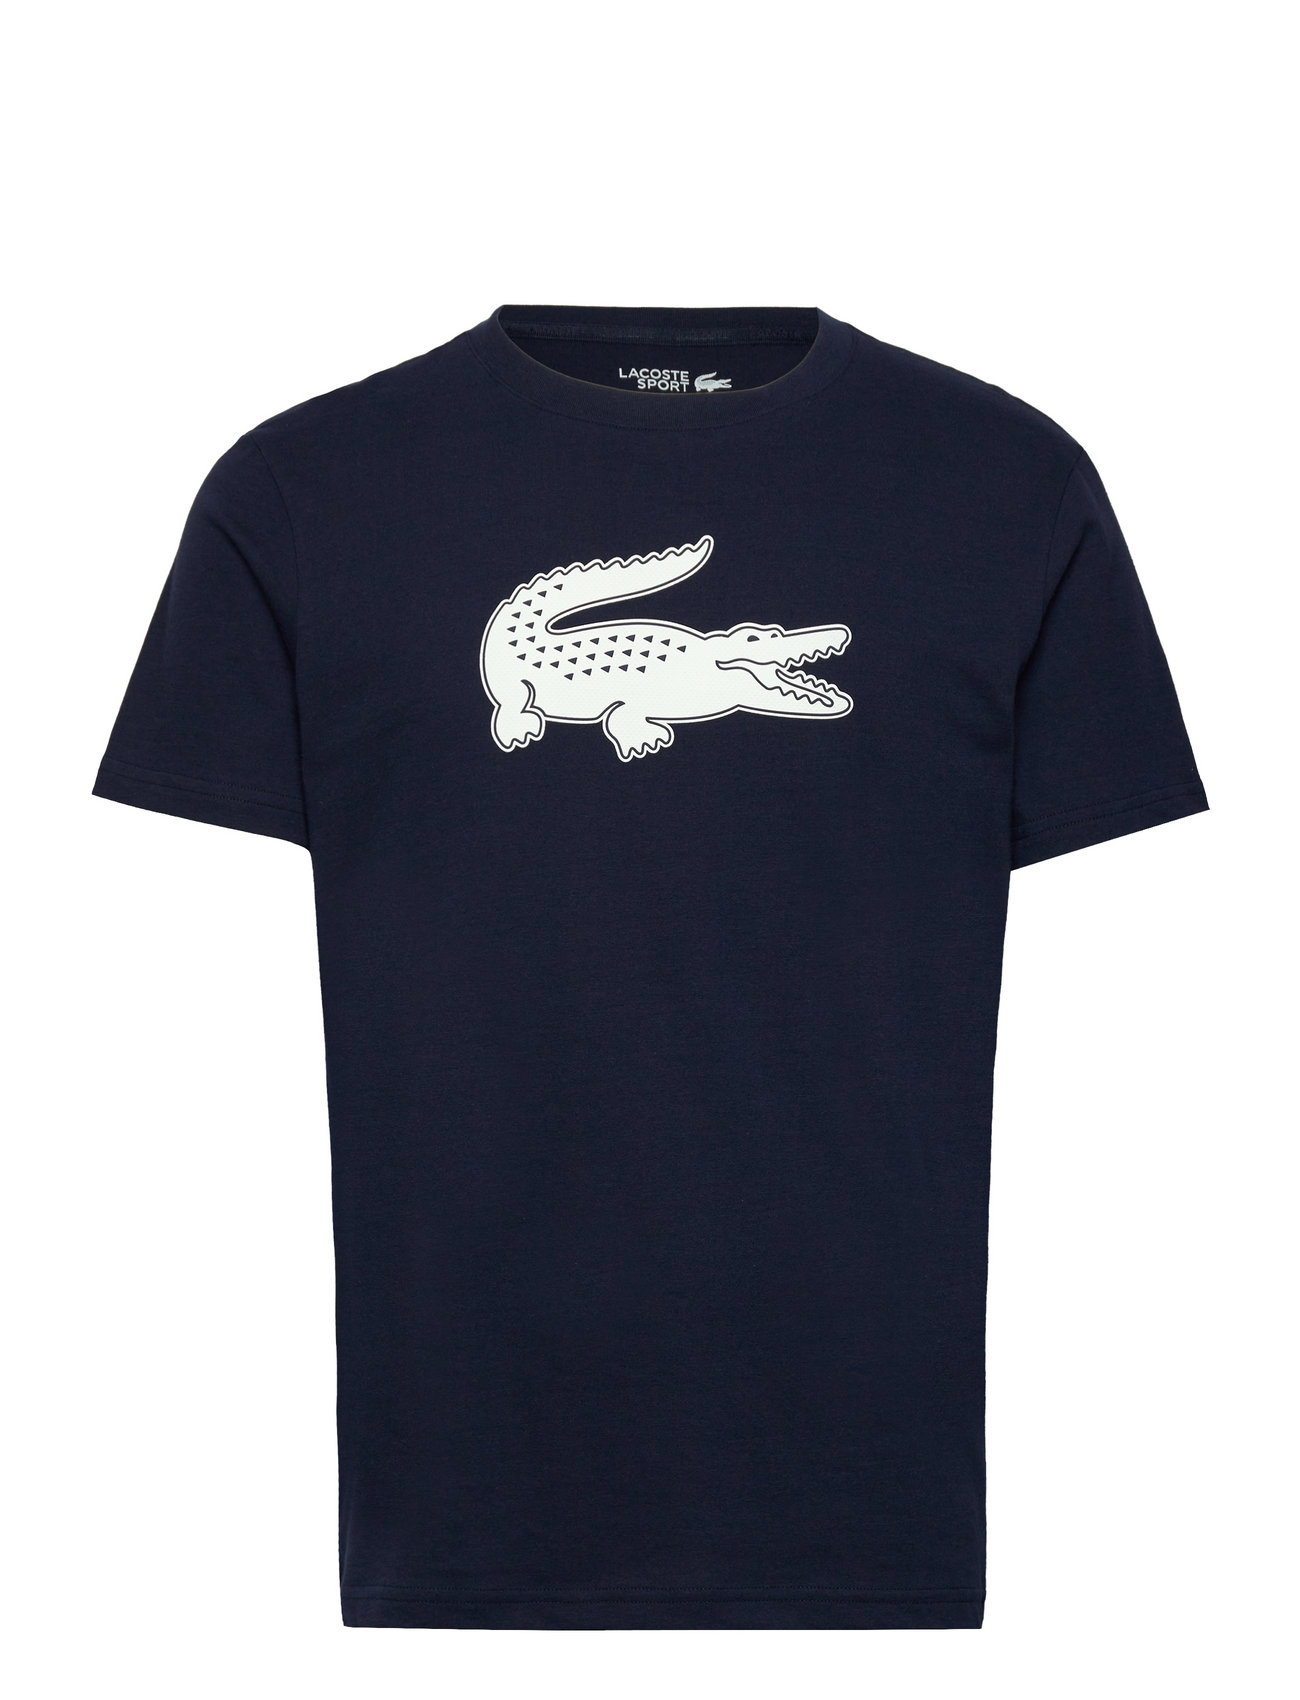 Tee-Shirt&Turtle Neck Tops T-shirts Short-sleeved Navy Lacoste